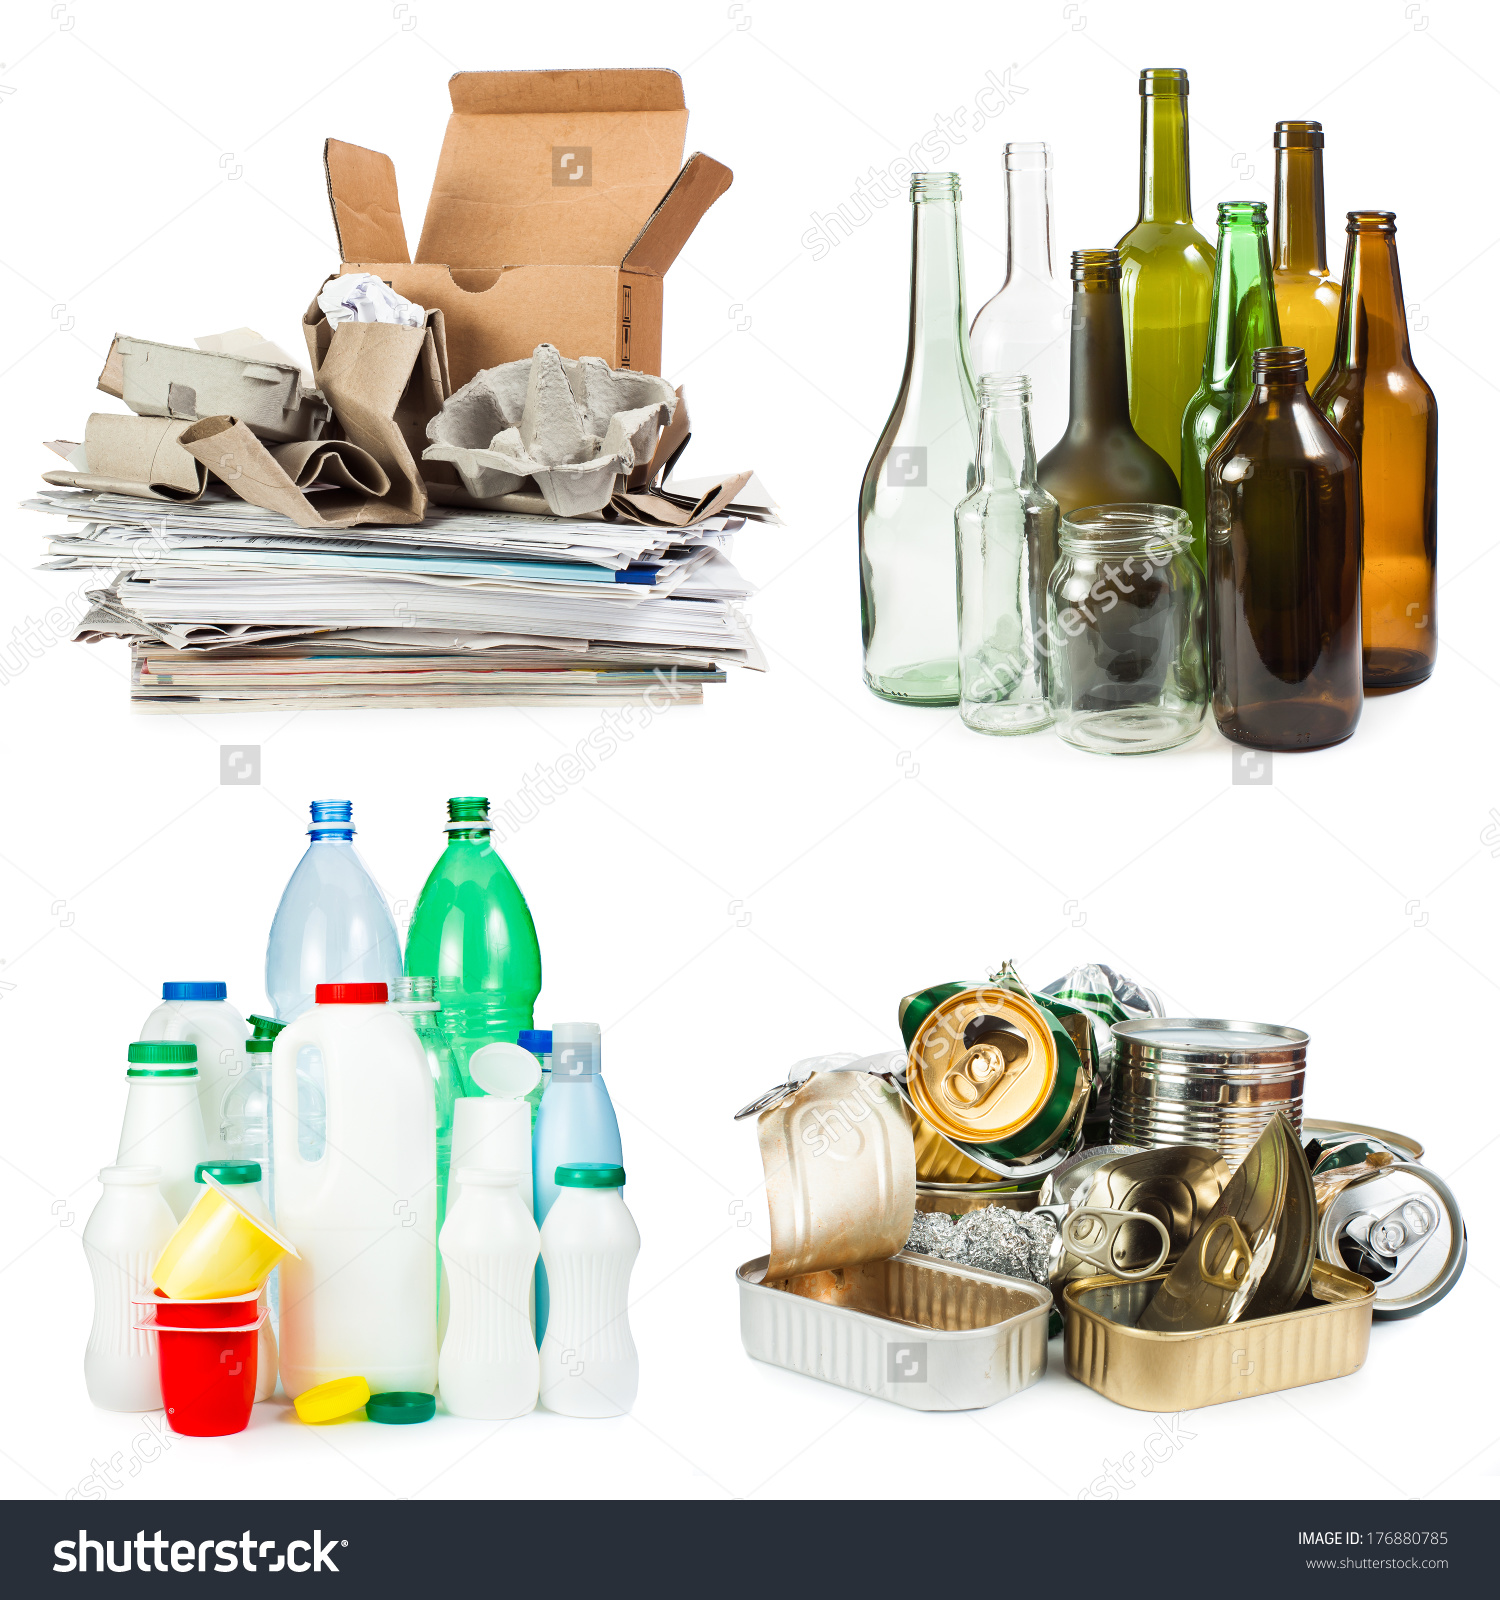 how to dispose non biodegradable waste